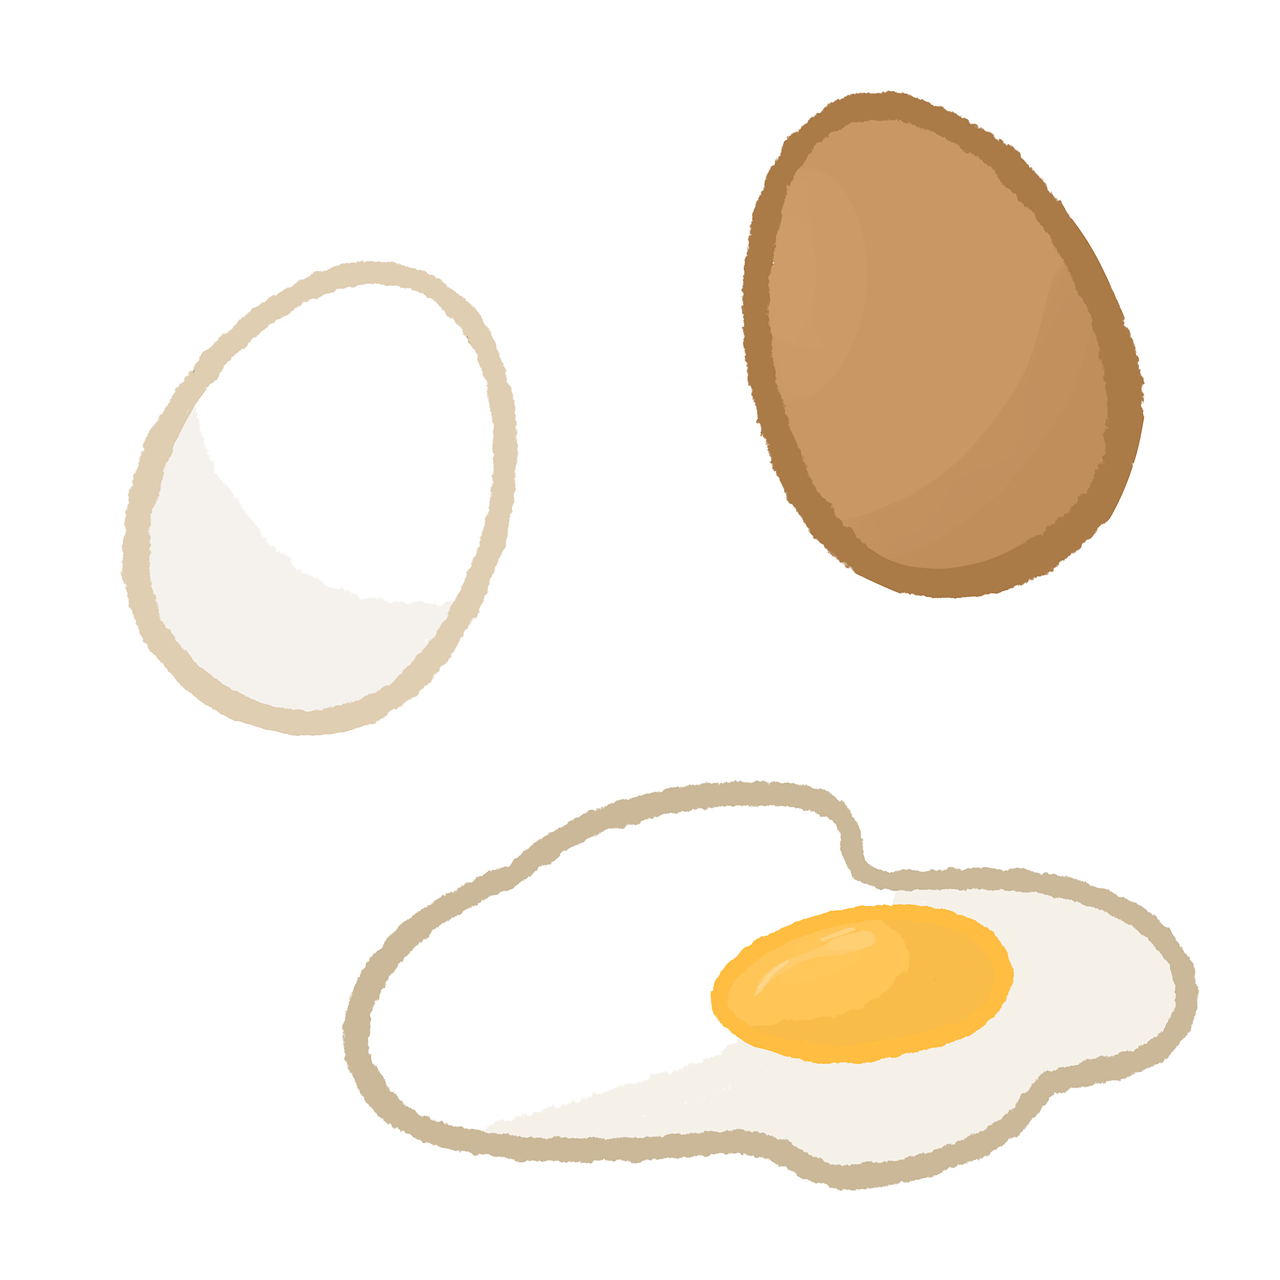 an egg and an egg yolk on a black background, an illustration of, sōsaku hanga, arnold 3 materials, three colors, high res, black and brown colors